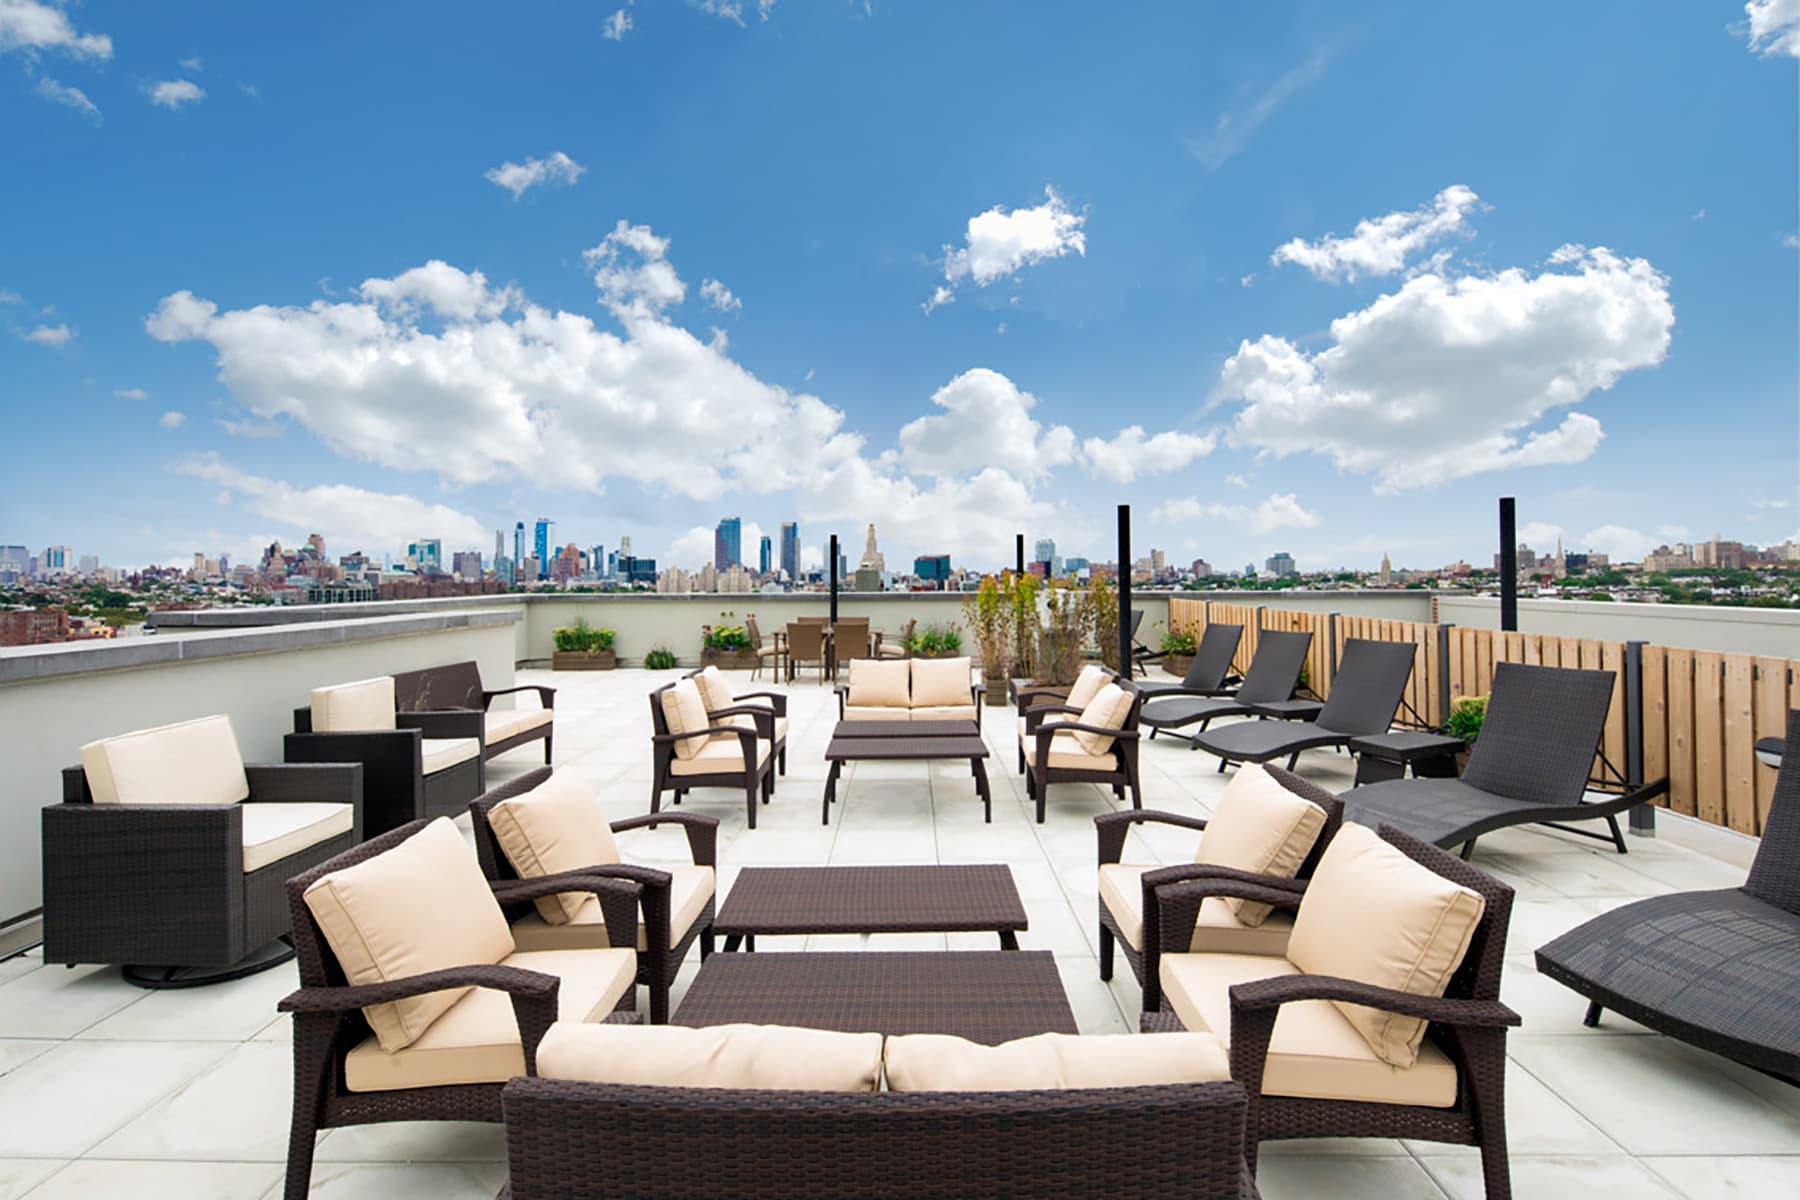 Beautiful Rooftop Deck with BBQ Grills and Seating